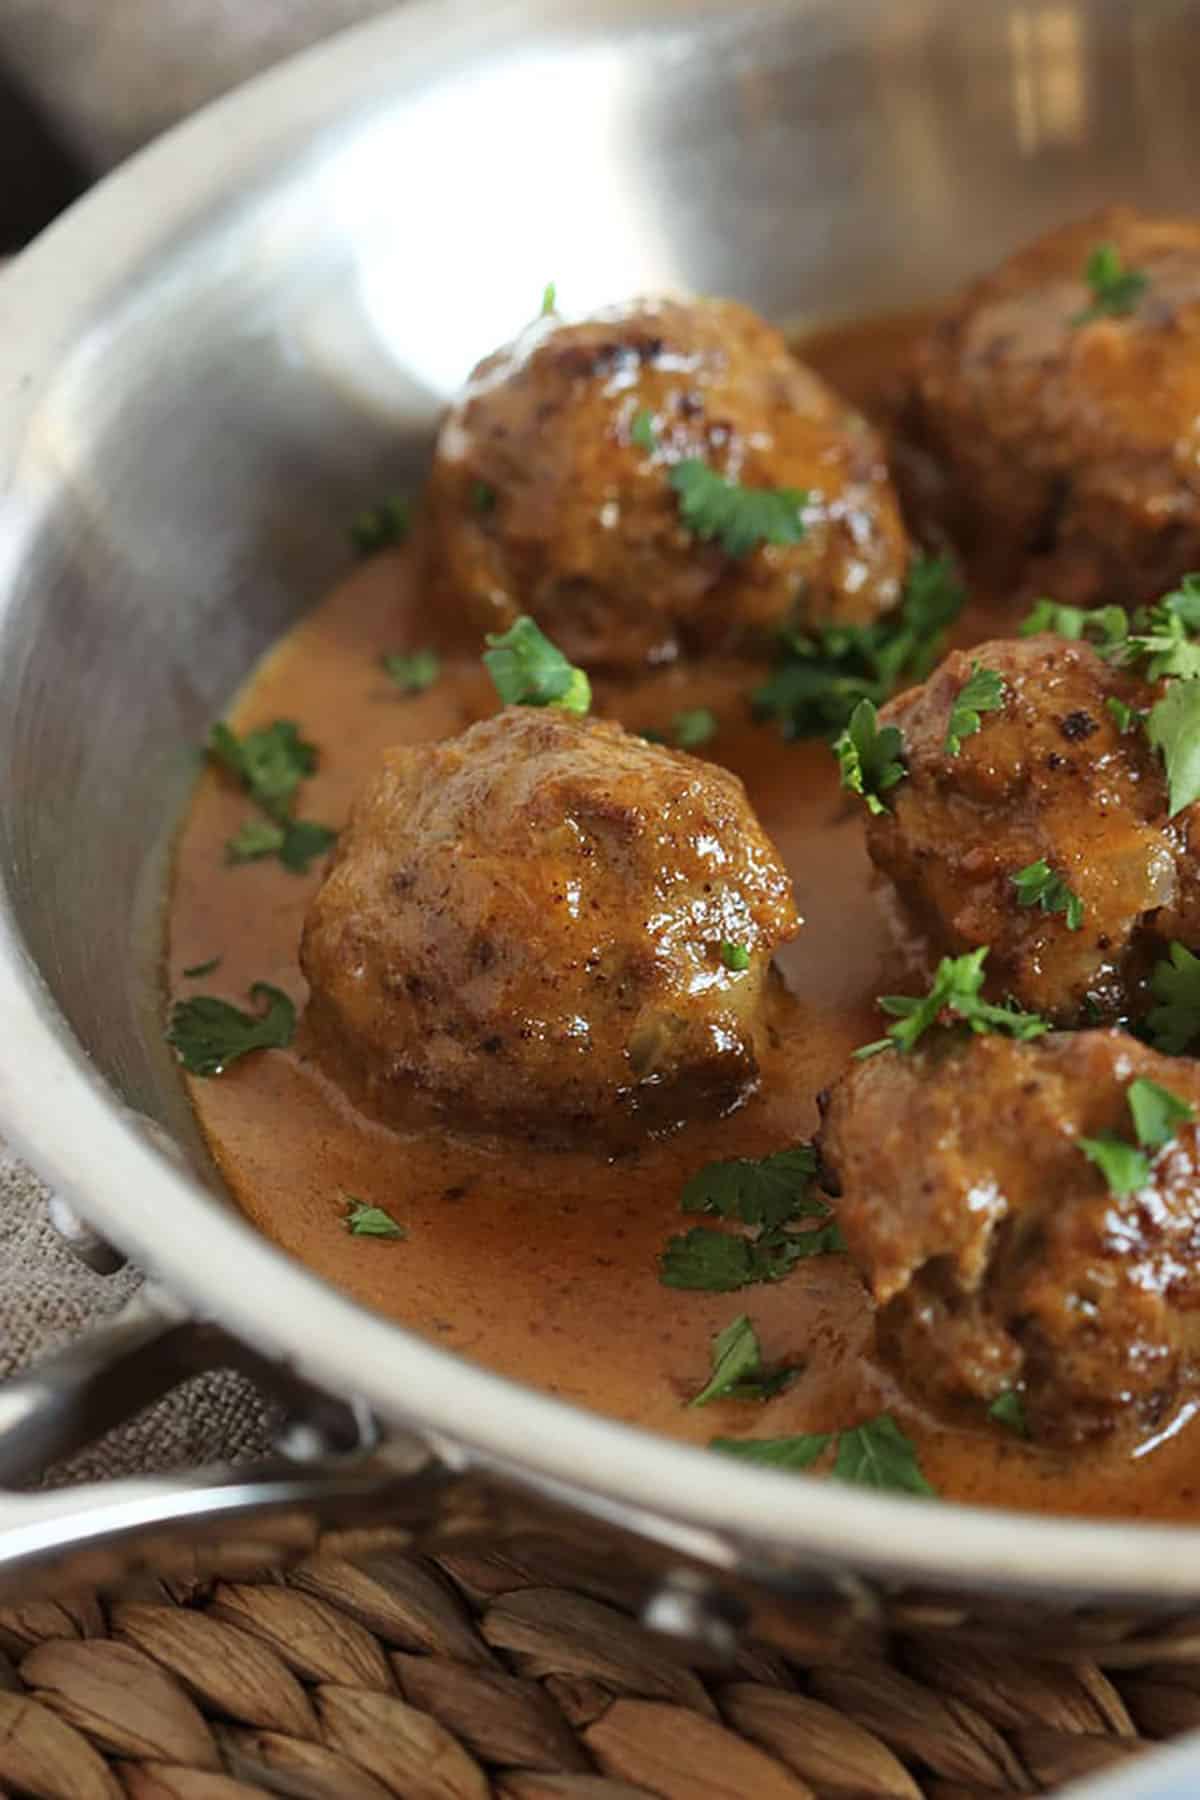 Swedish Meatballs in a stainless steel skillet.